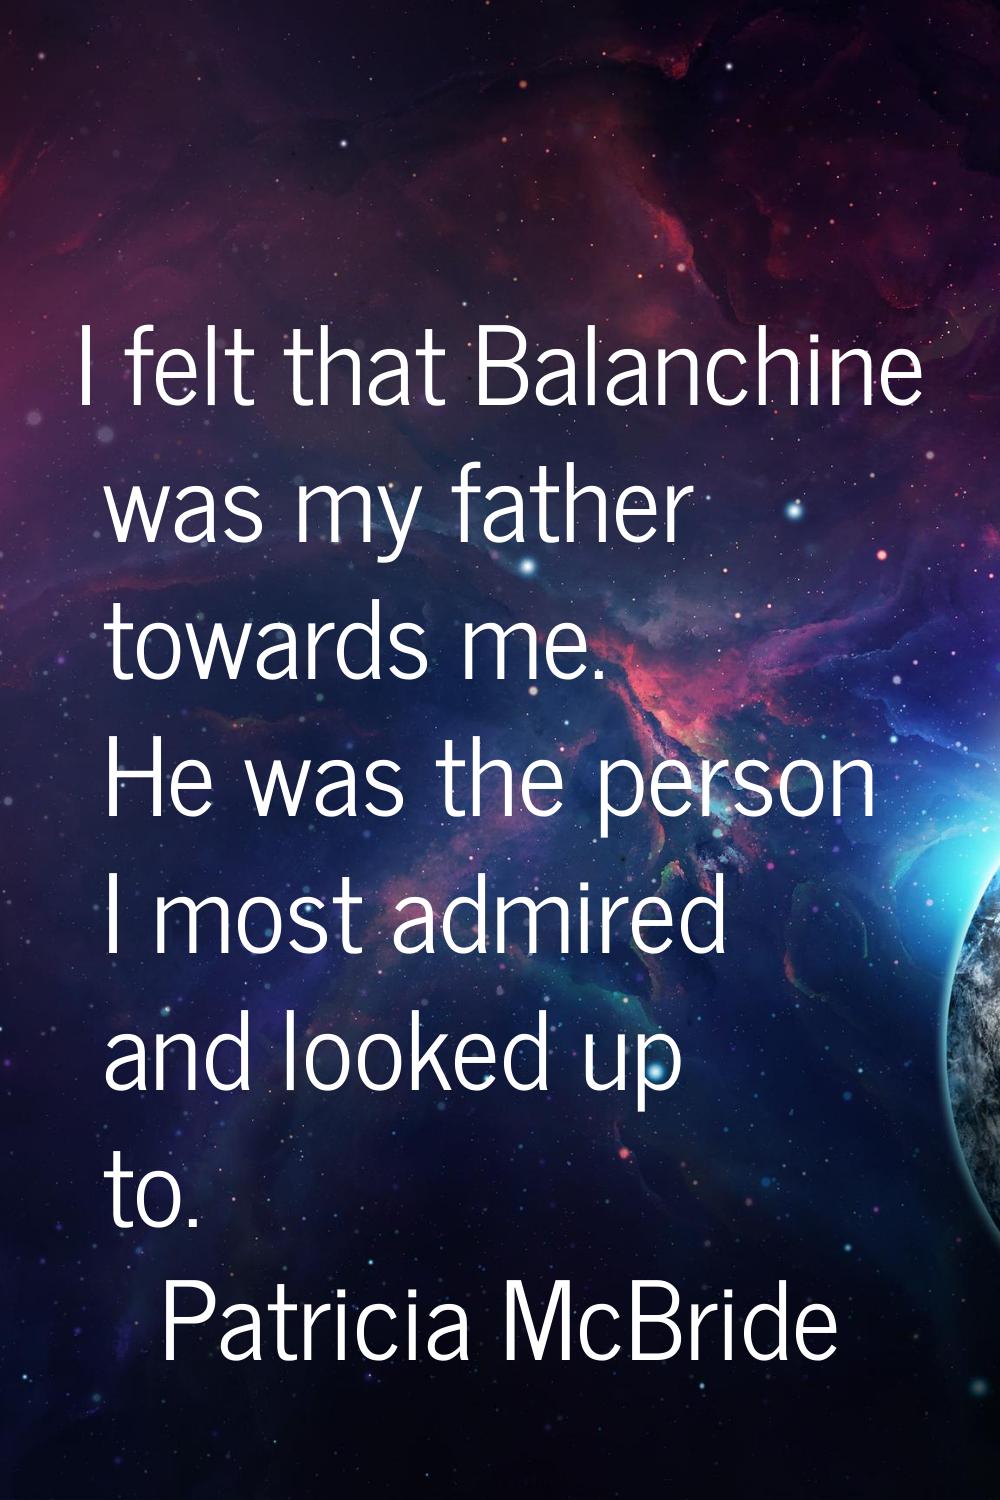 I felt that Balanchine was my father towards me. He was the person I most admired and looked up to.